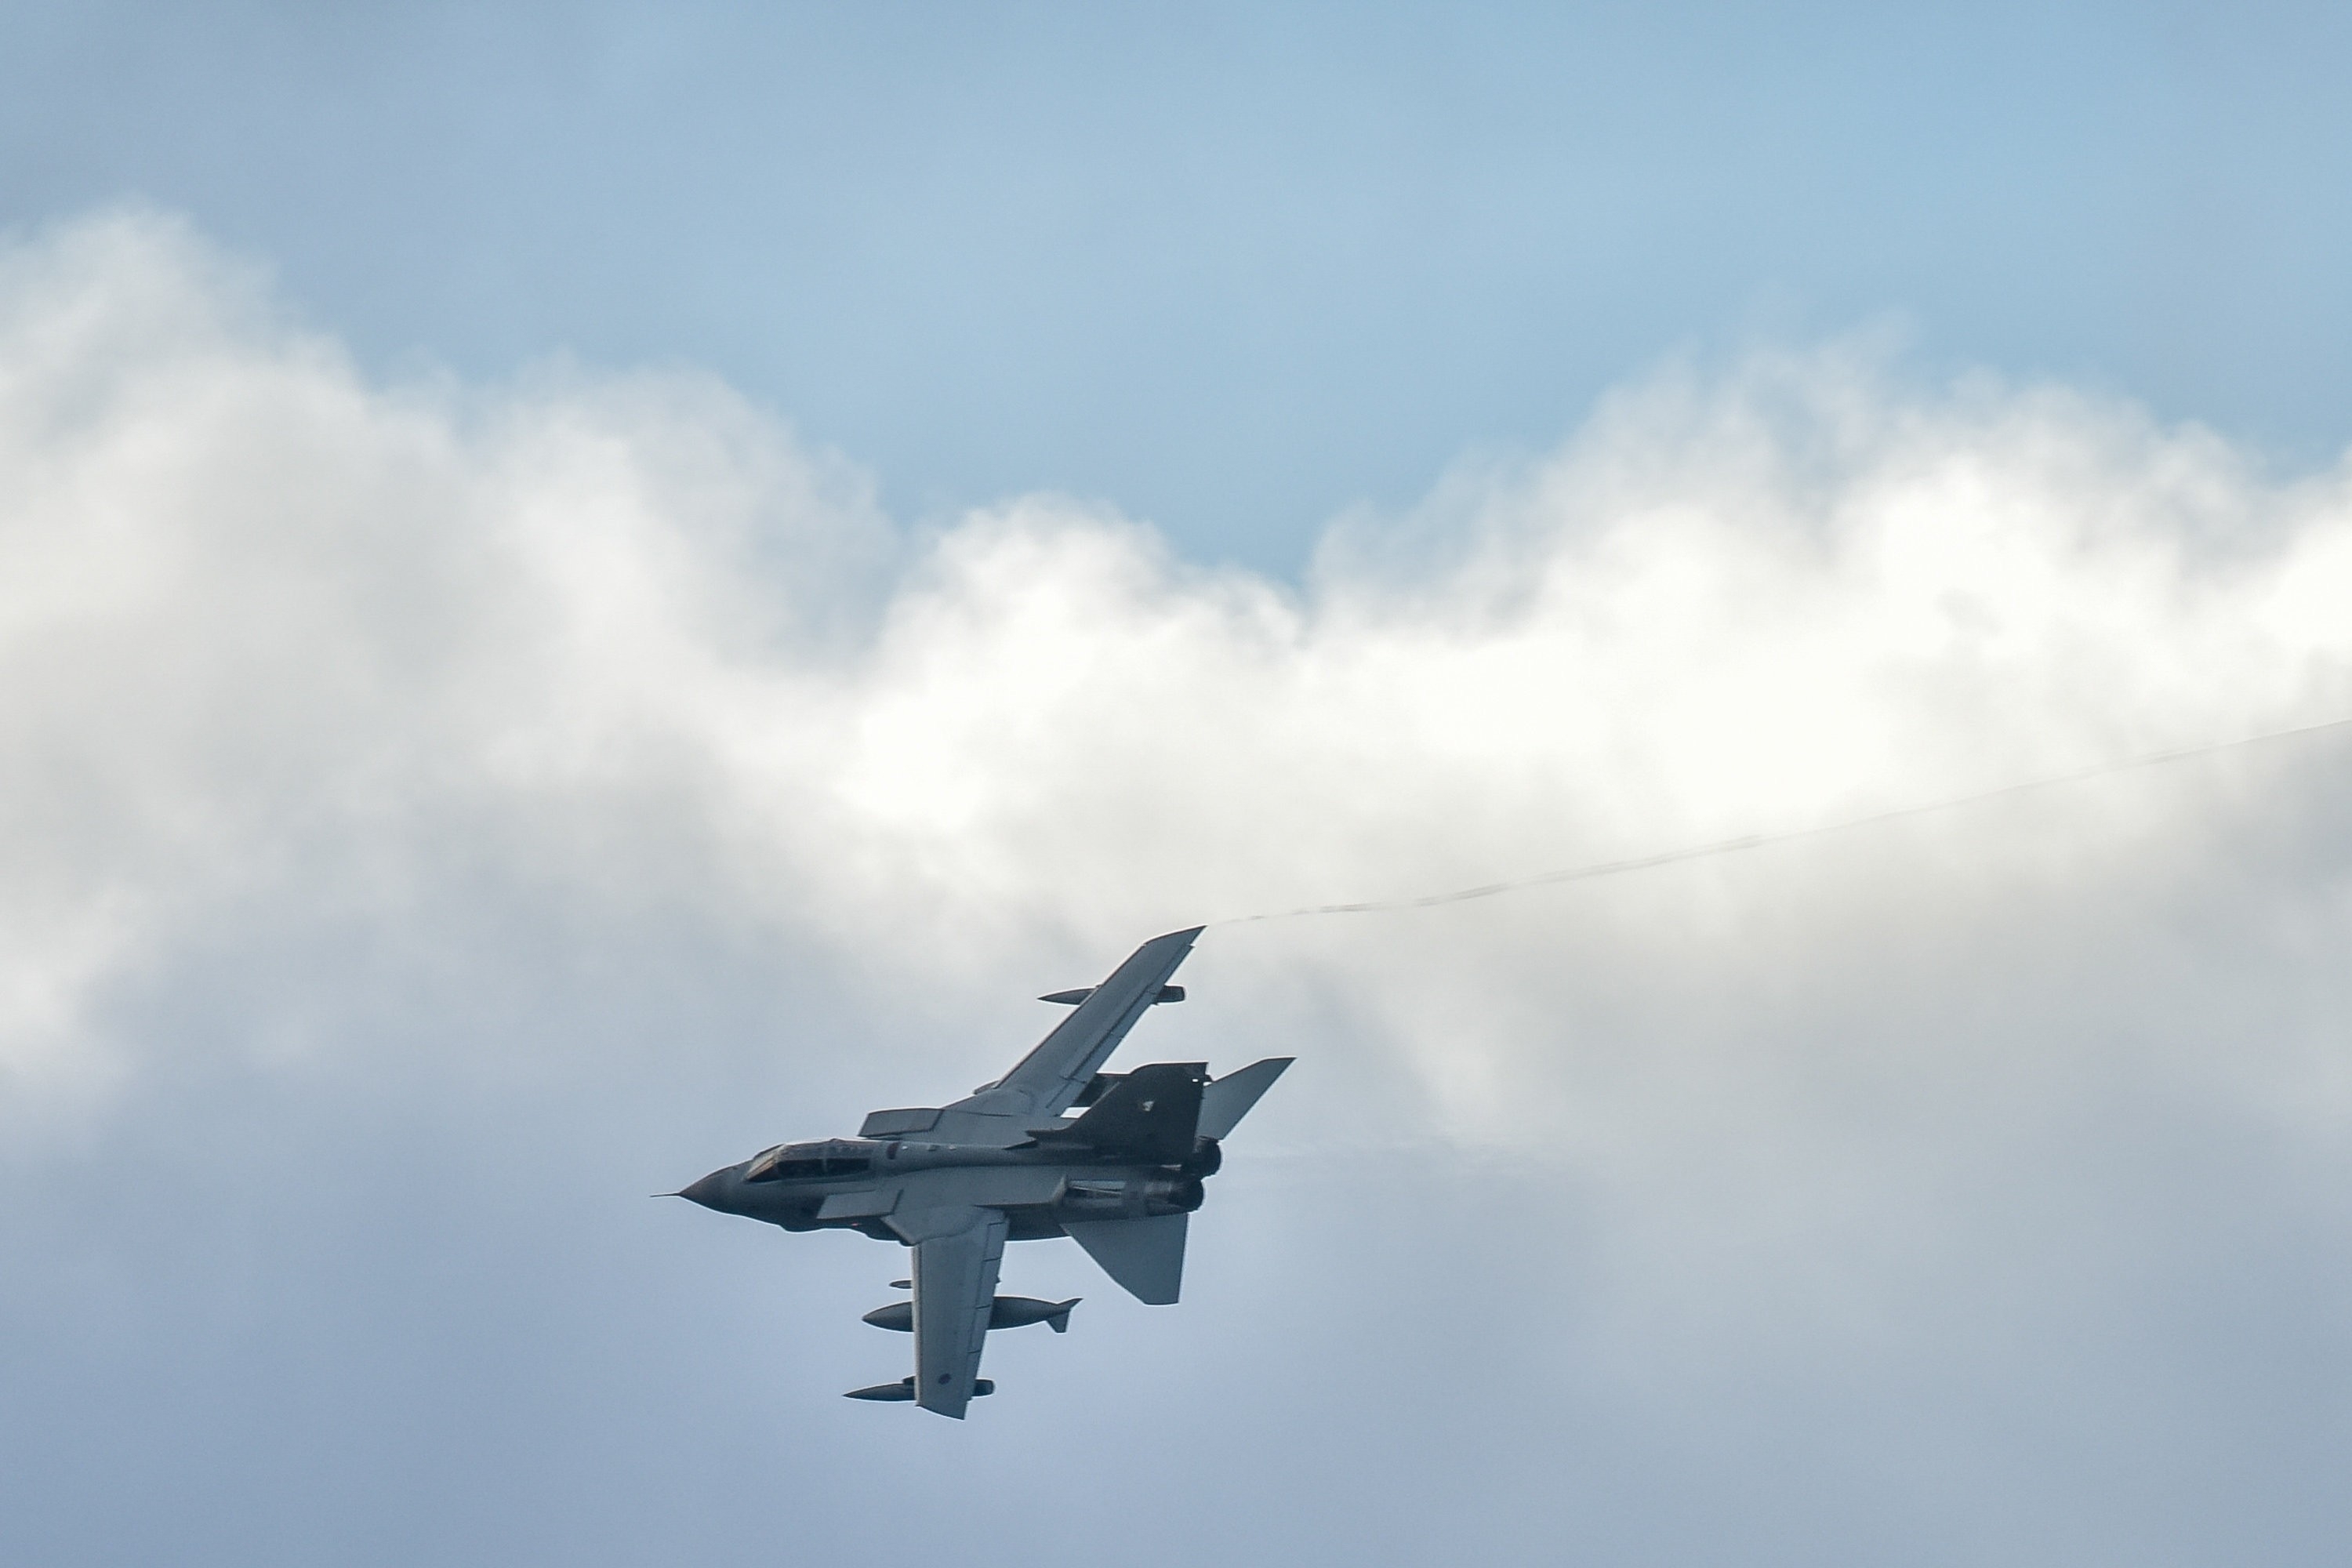 An RAF Tornado GR4 is pictured flying above RAF Lossiemouth